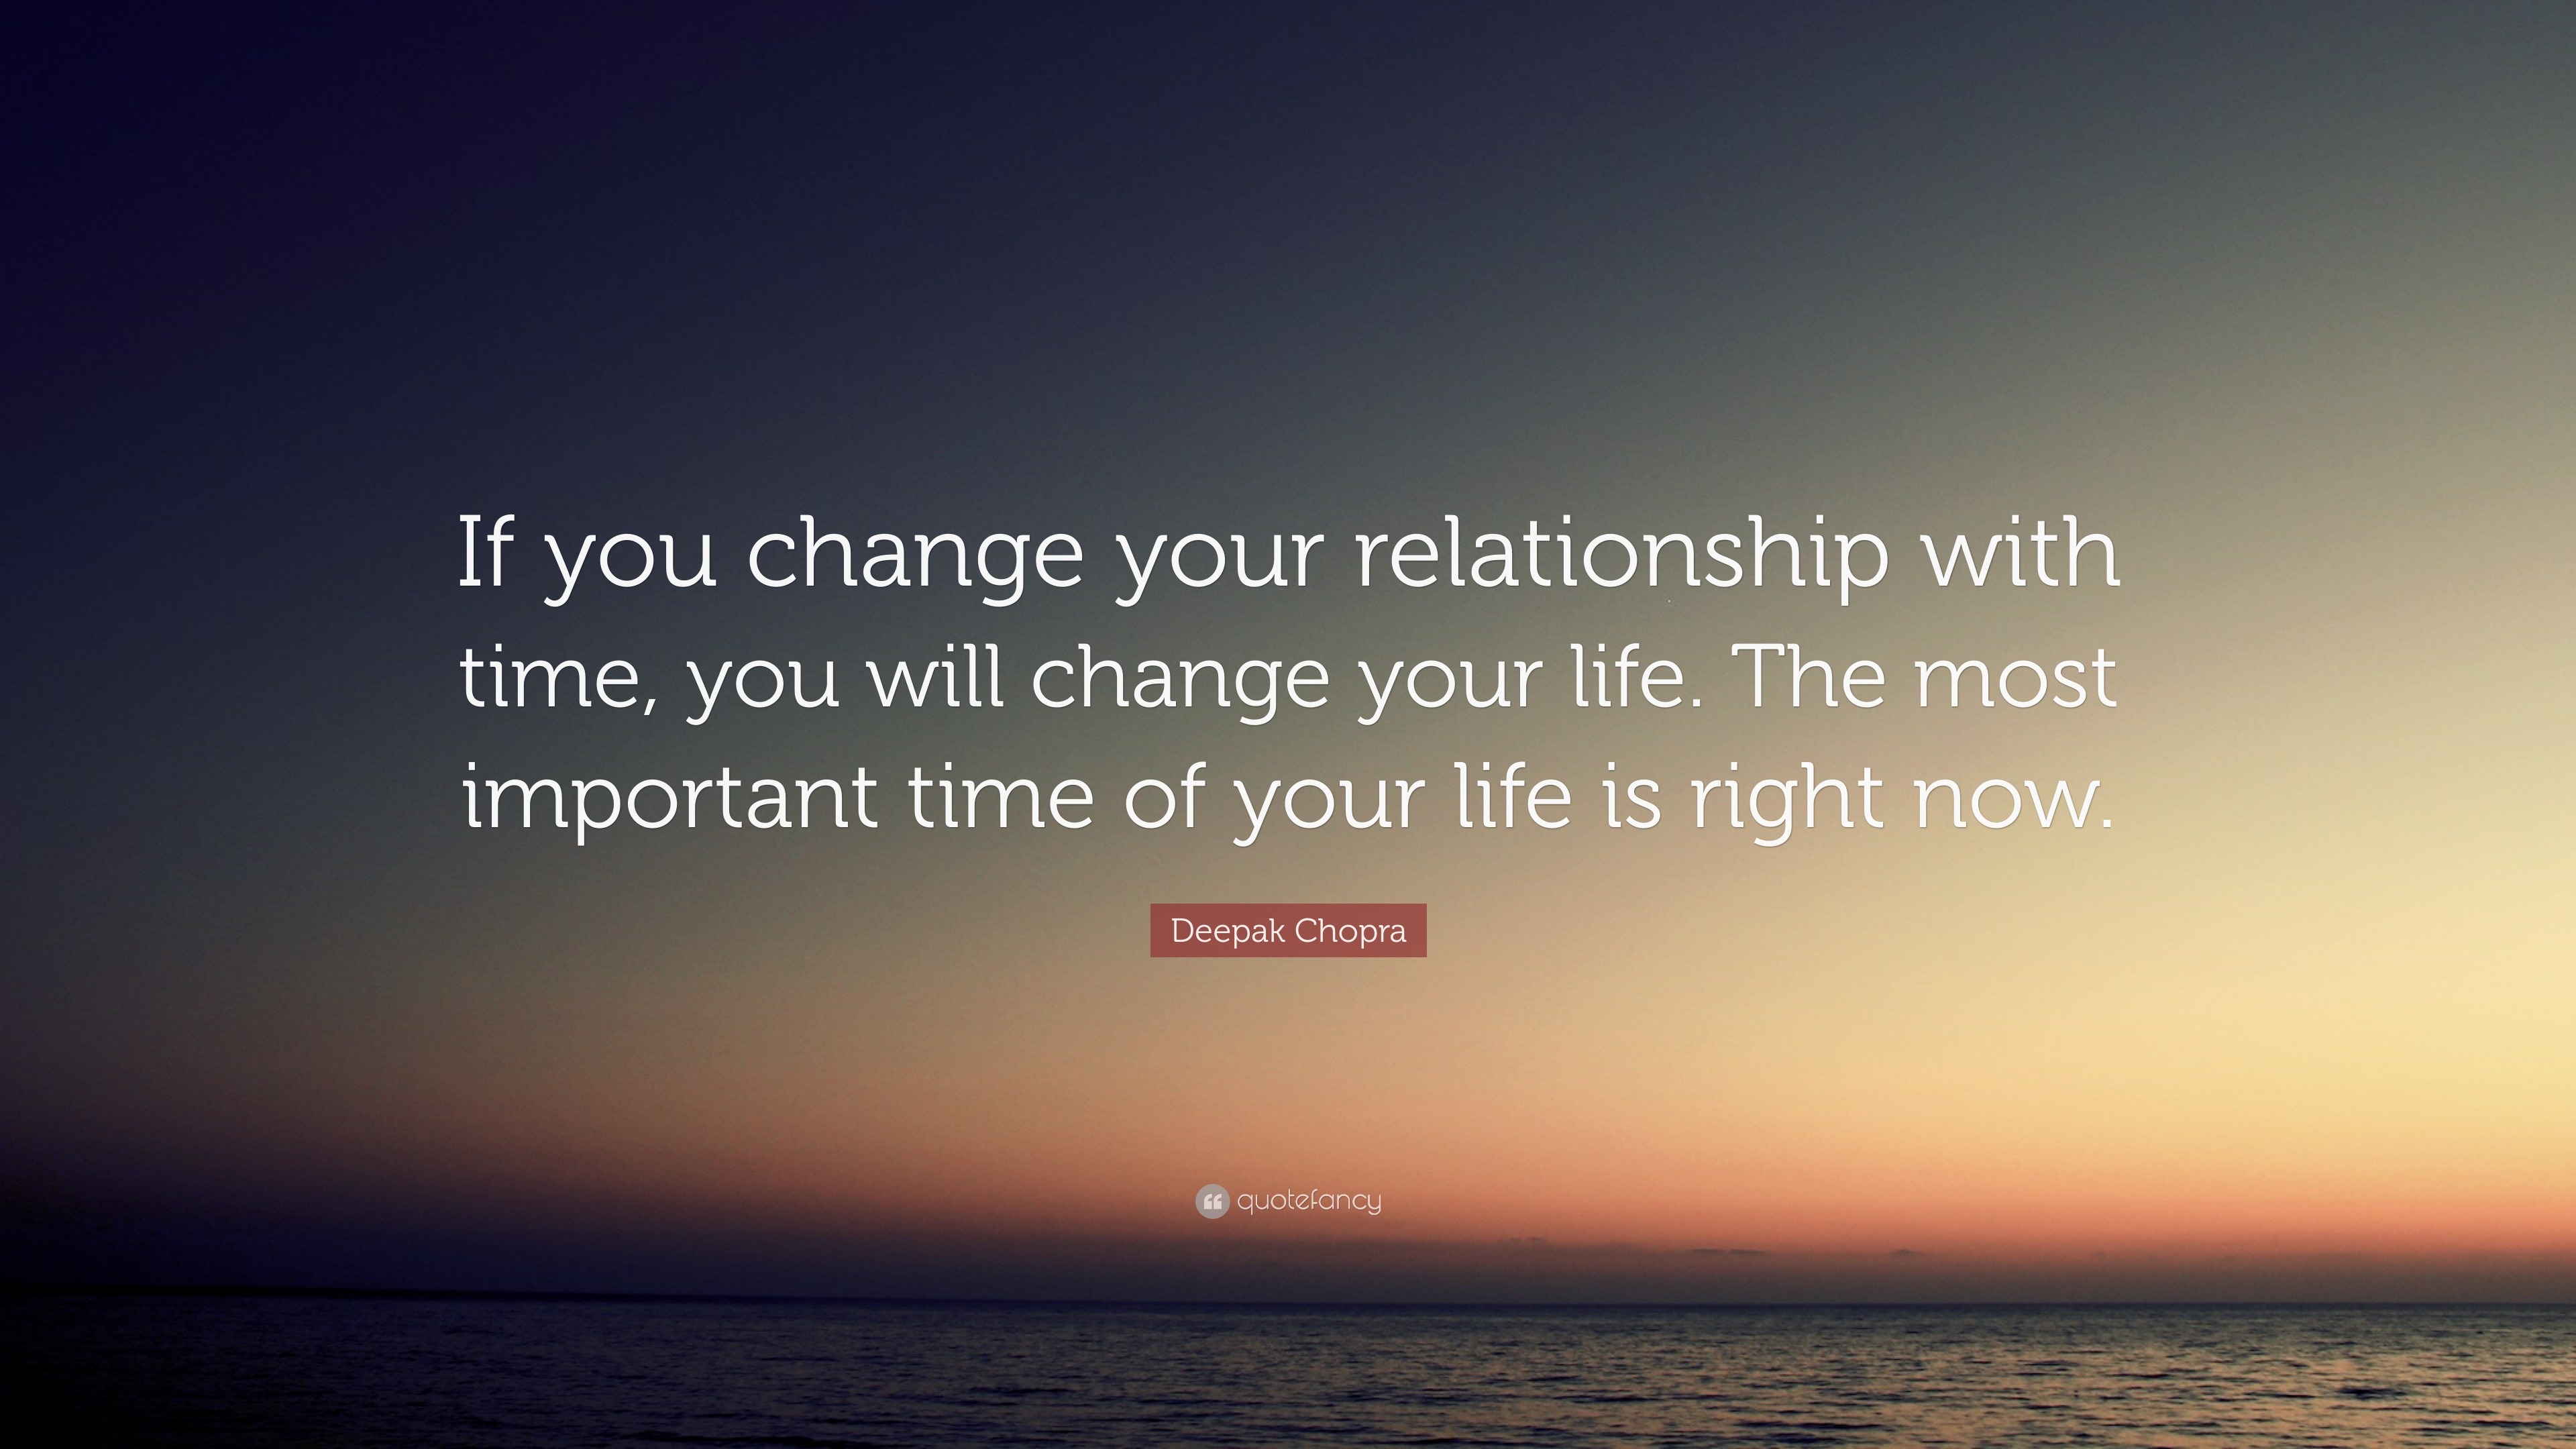 Deepak Chopra Quote “If you change your relationship with time you will change